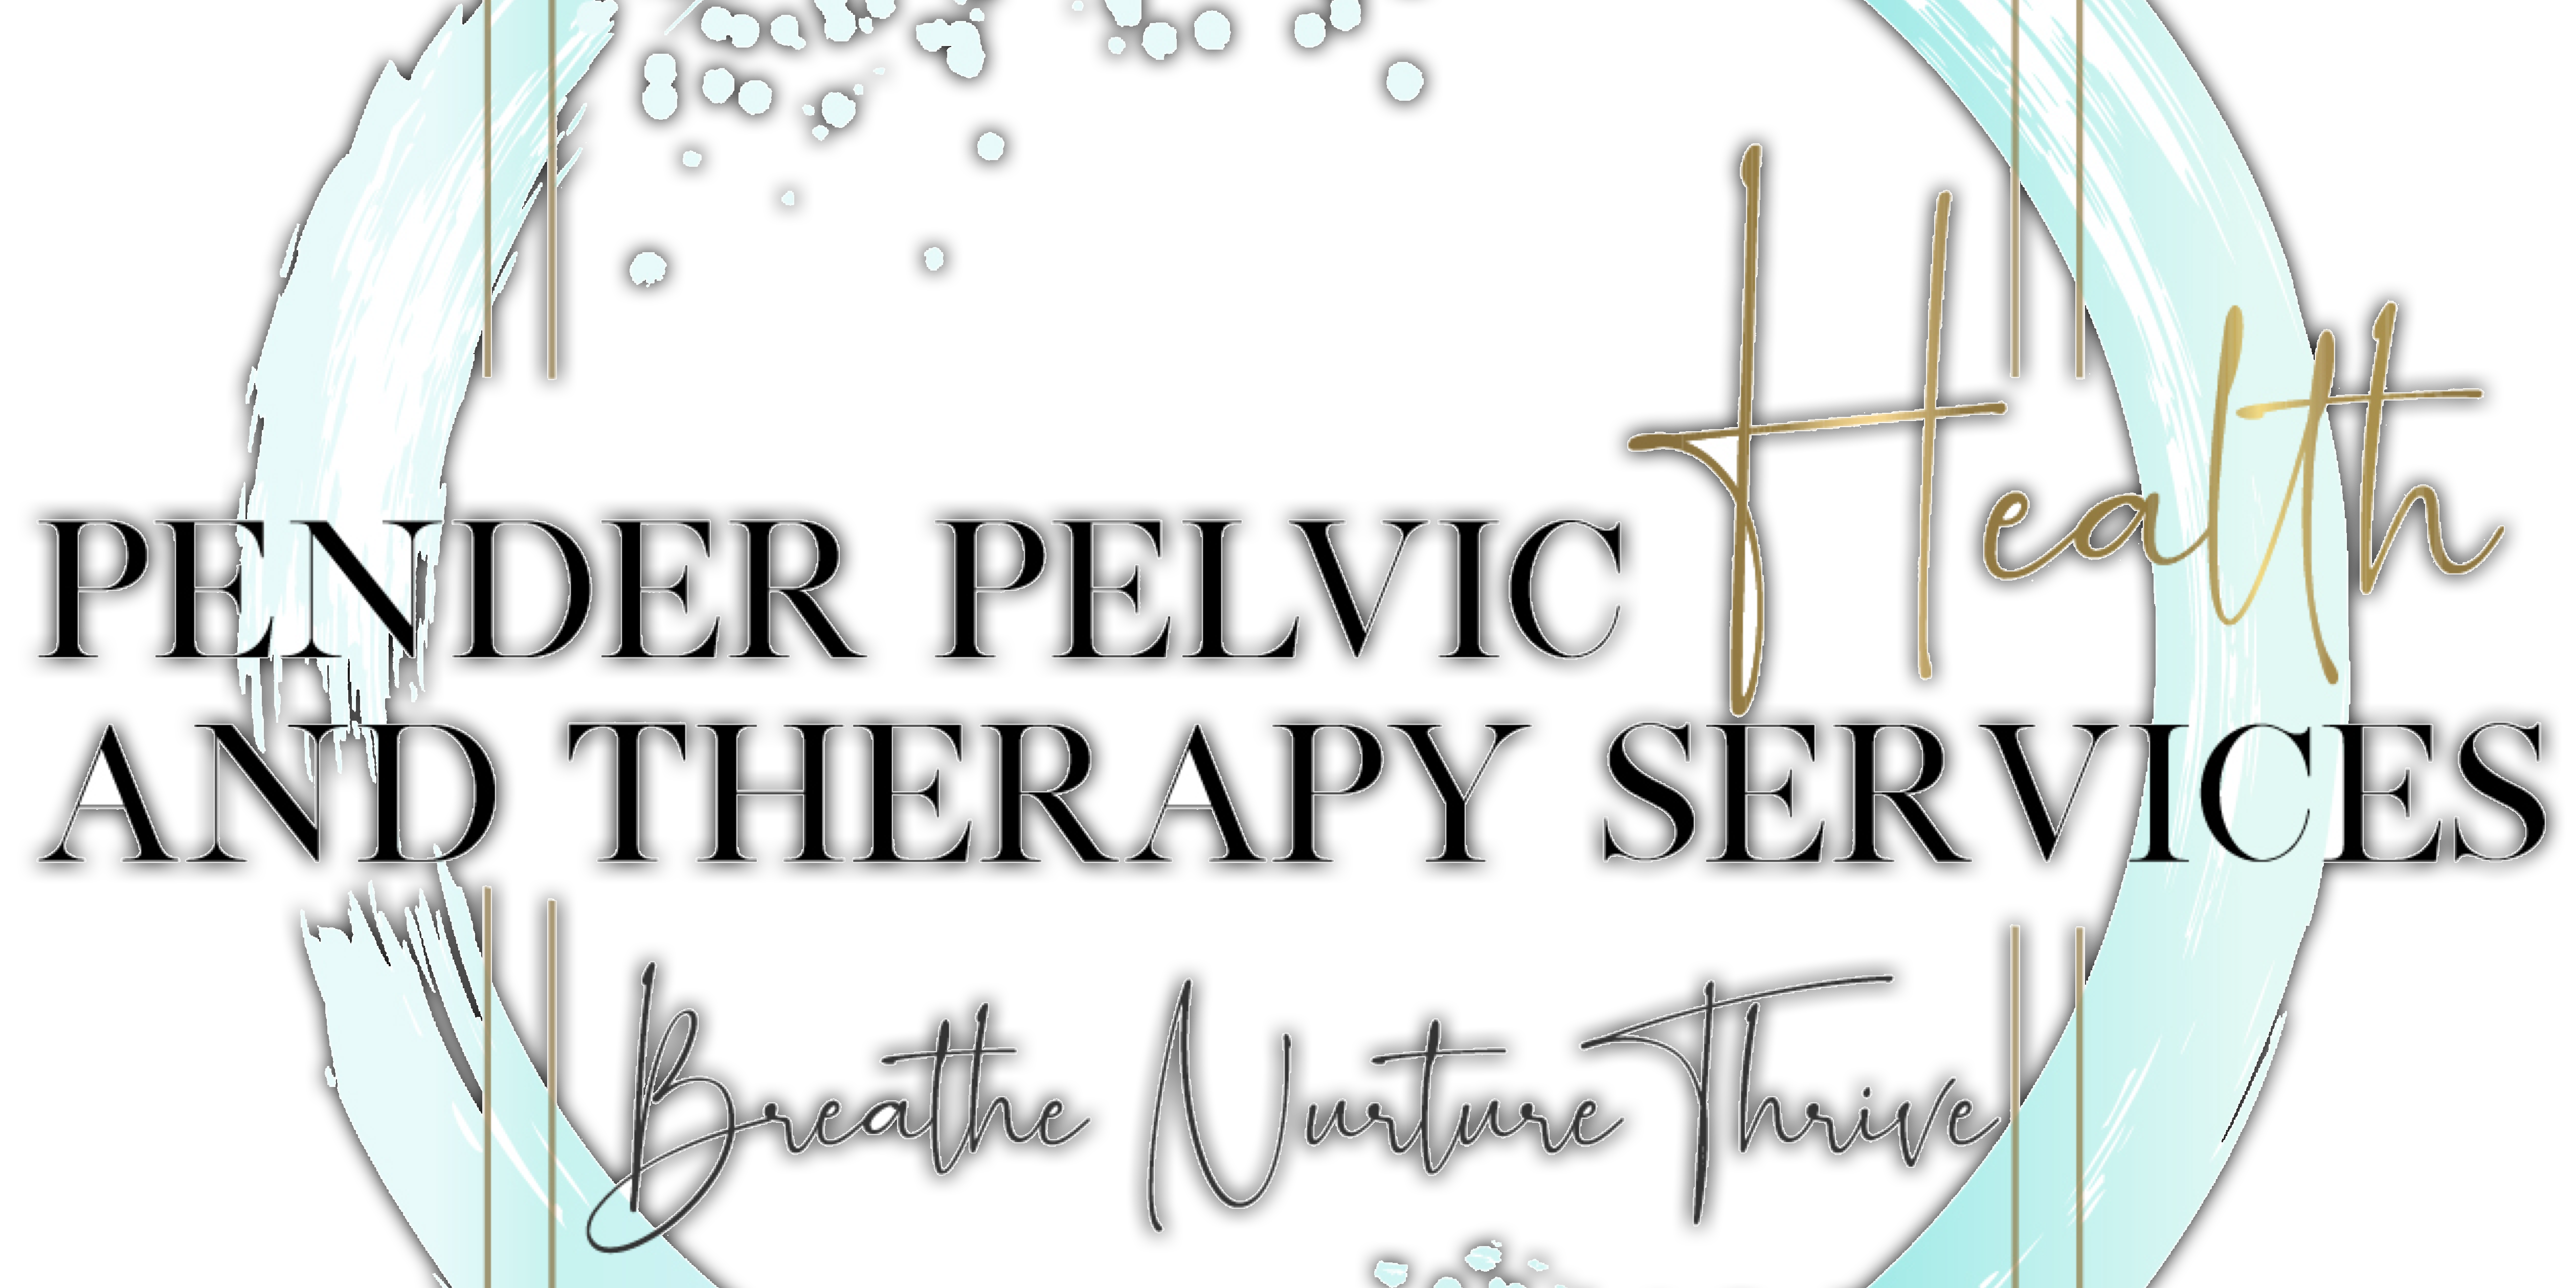 Pender Pelvic Health and Therapy